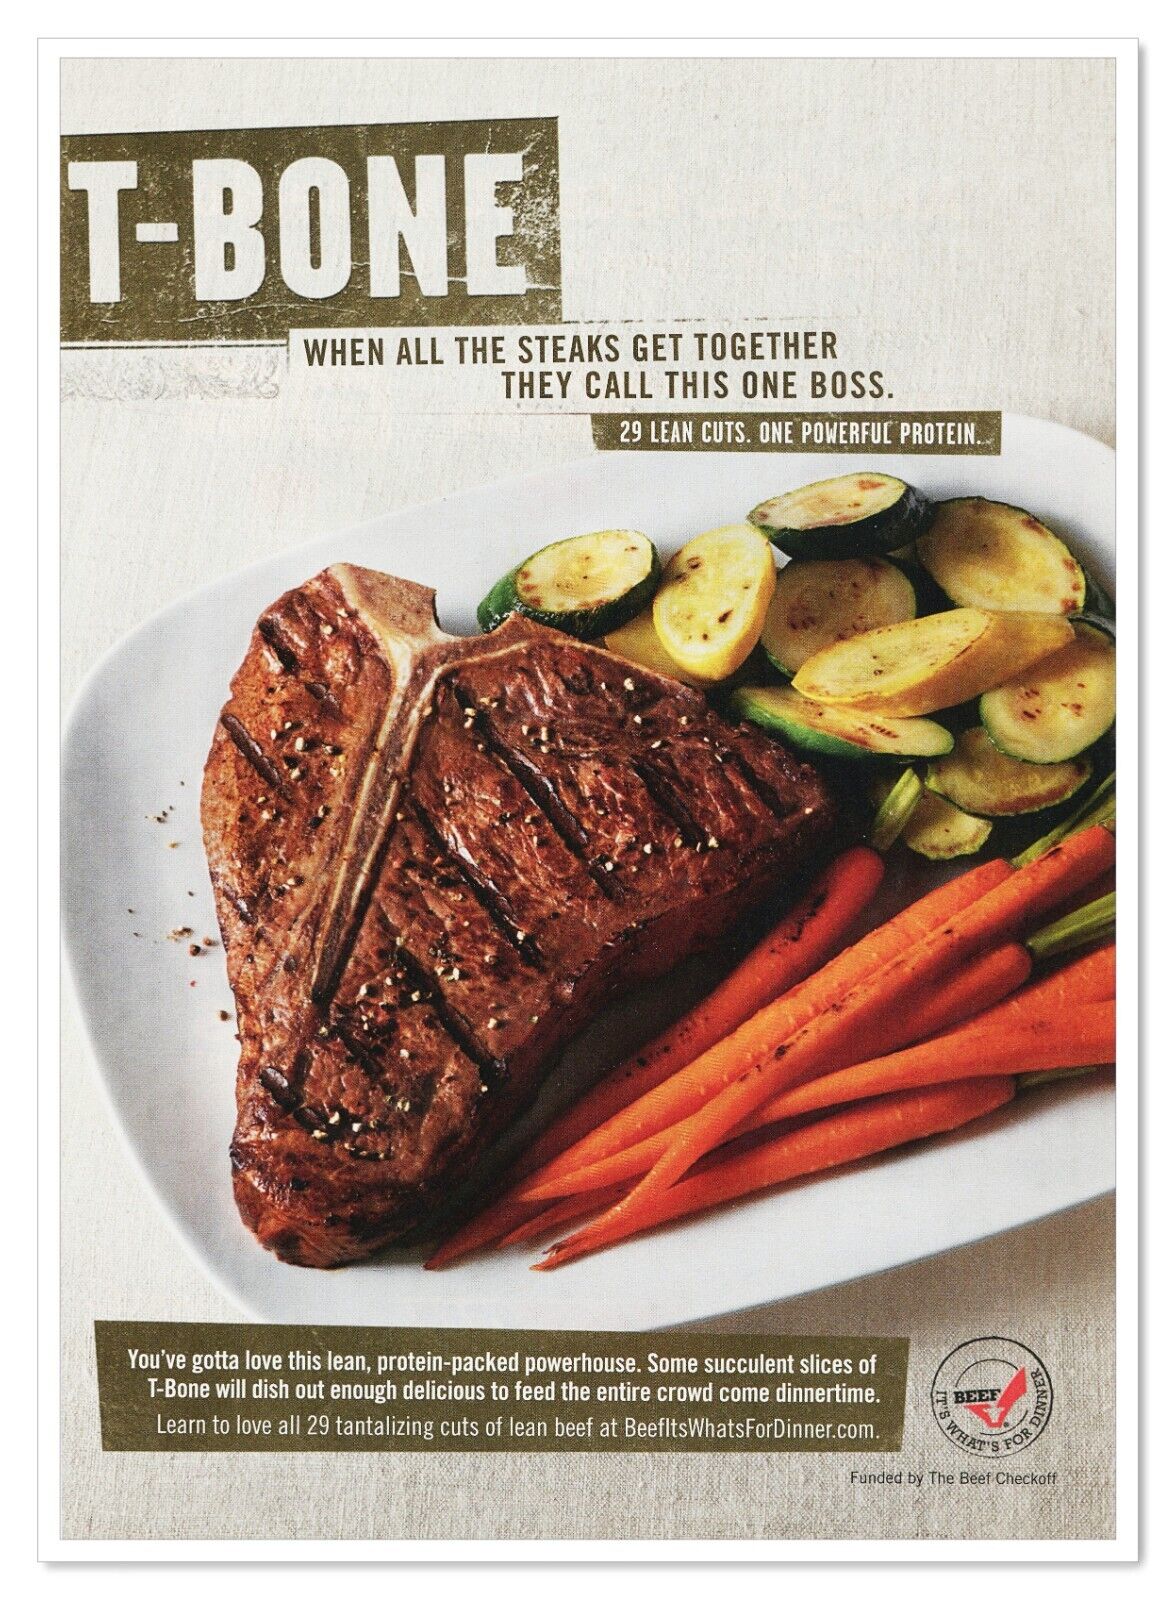 Beef It's What's for Dinner T-Bone Steak 2012 Full-Page Print Magazine Ad